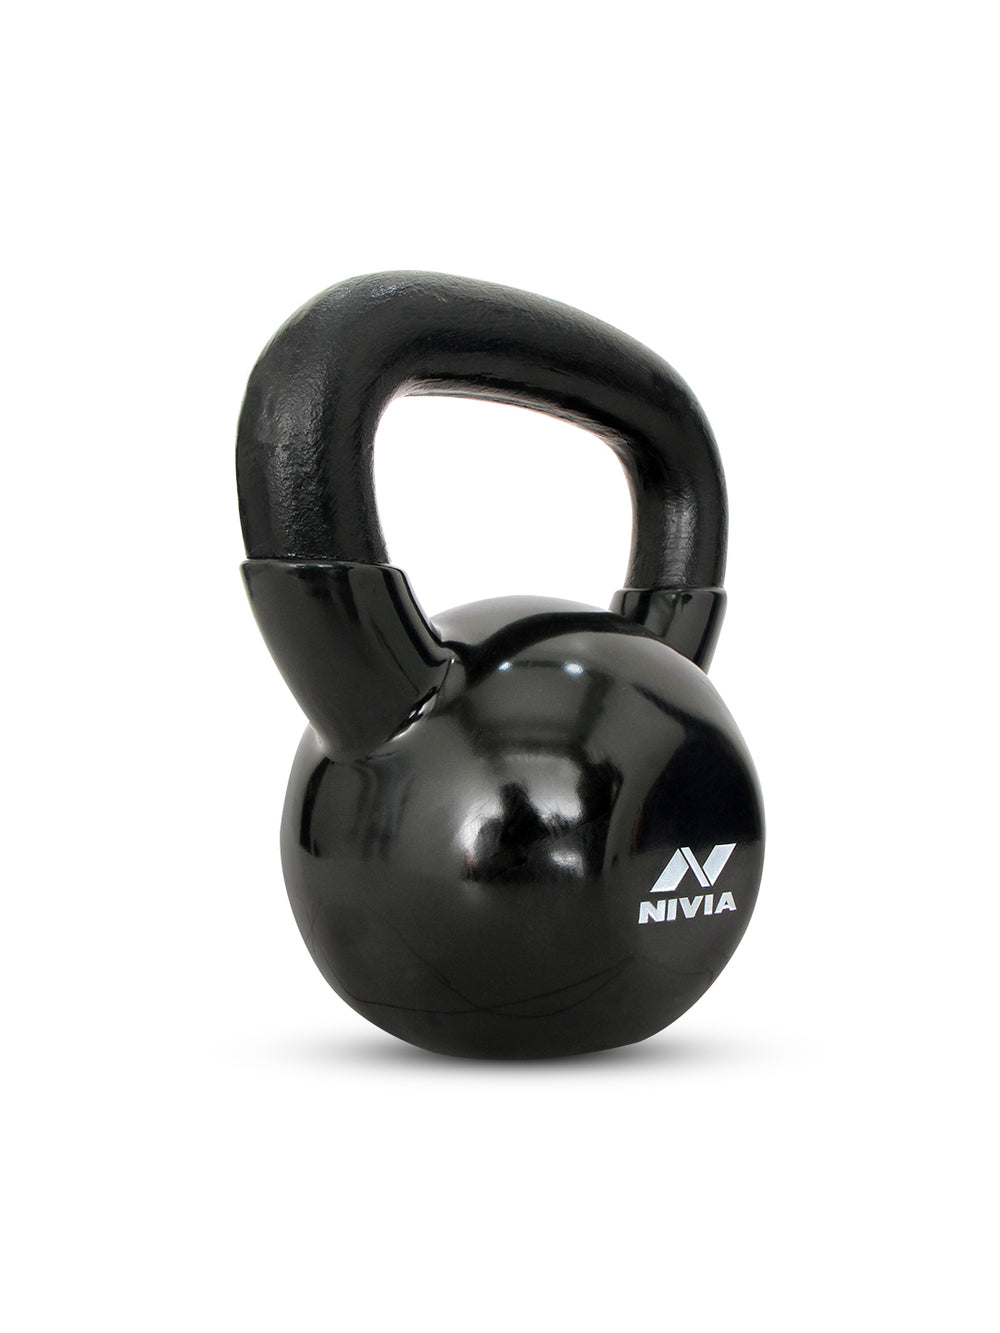 Buy BABA SPORTS Kettlebell, 10Kg Kettle Bell, Cast Iron Kettlebell,  Kettlebells Weight, Kettlebells for Home Gym Online at Low Prices in India  